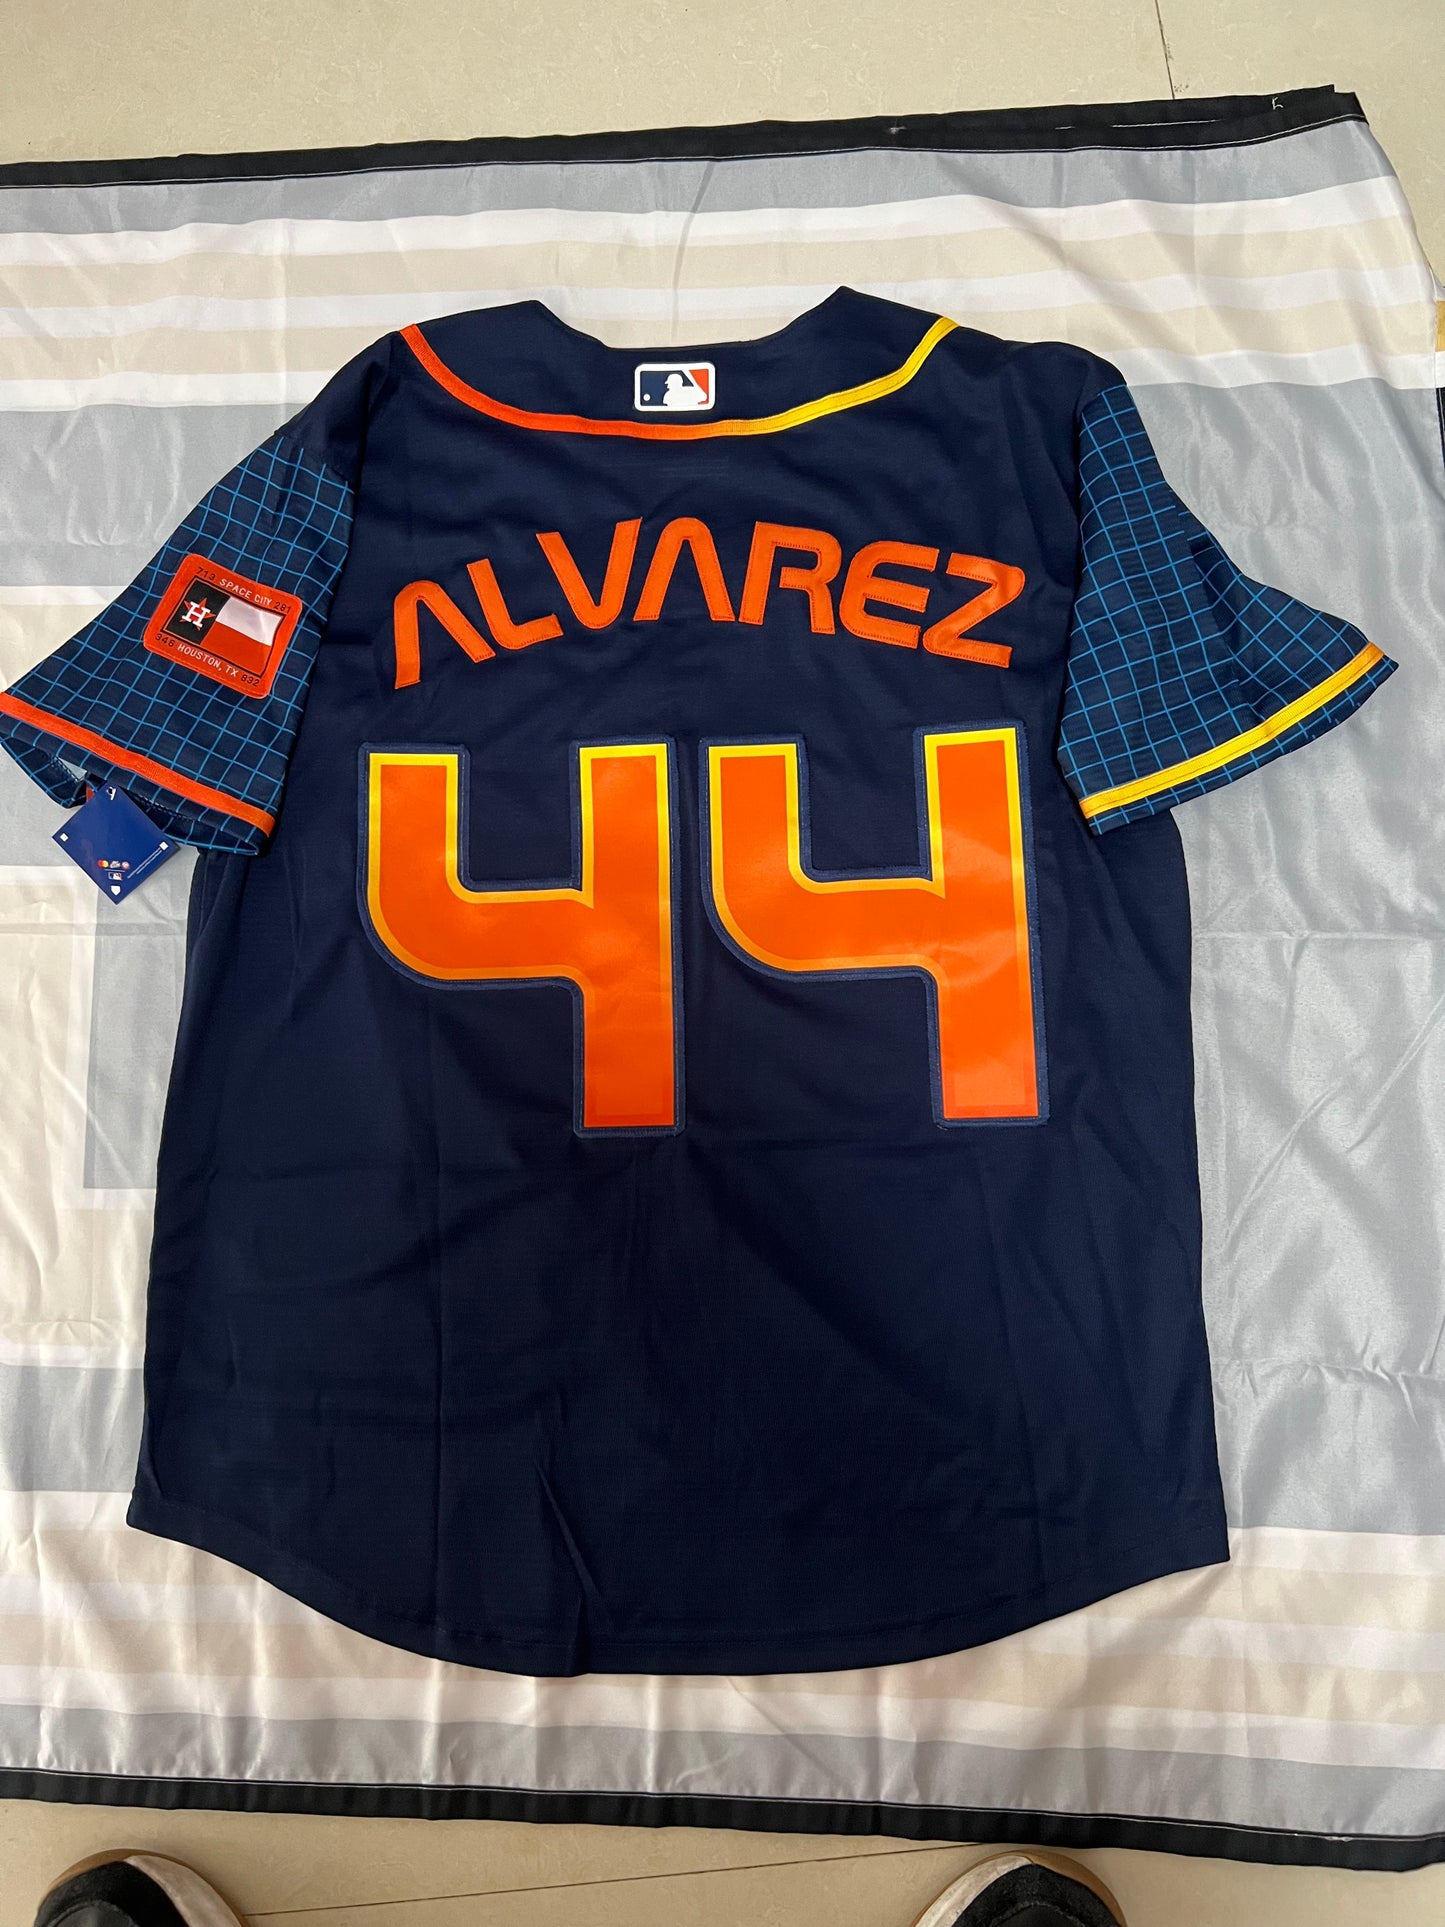 PHOTOS: 'This is Space City': New Houston Astros uniforms pay